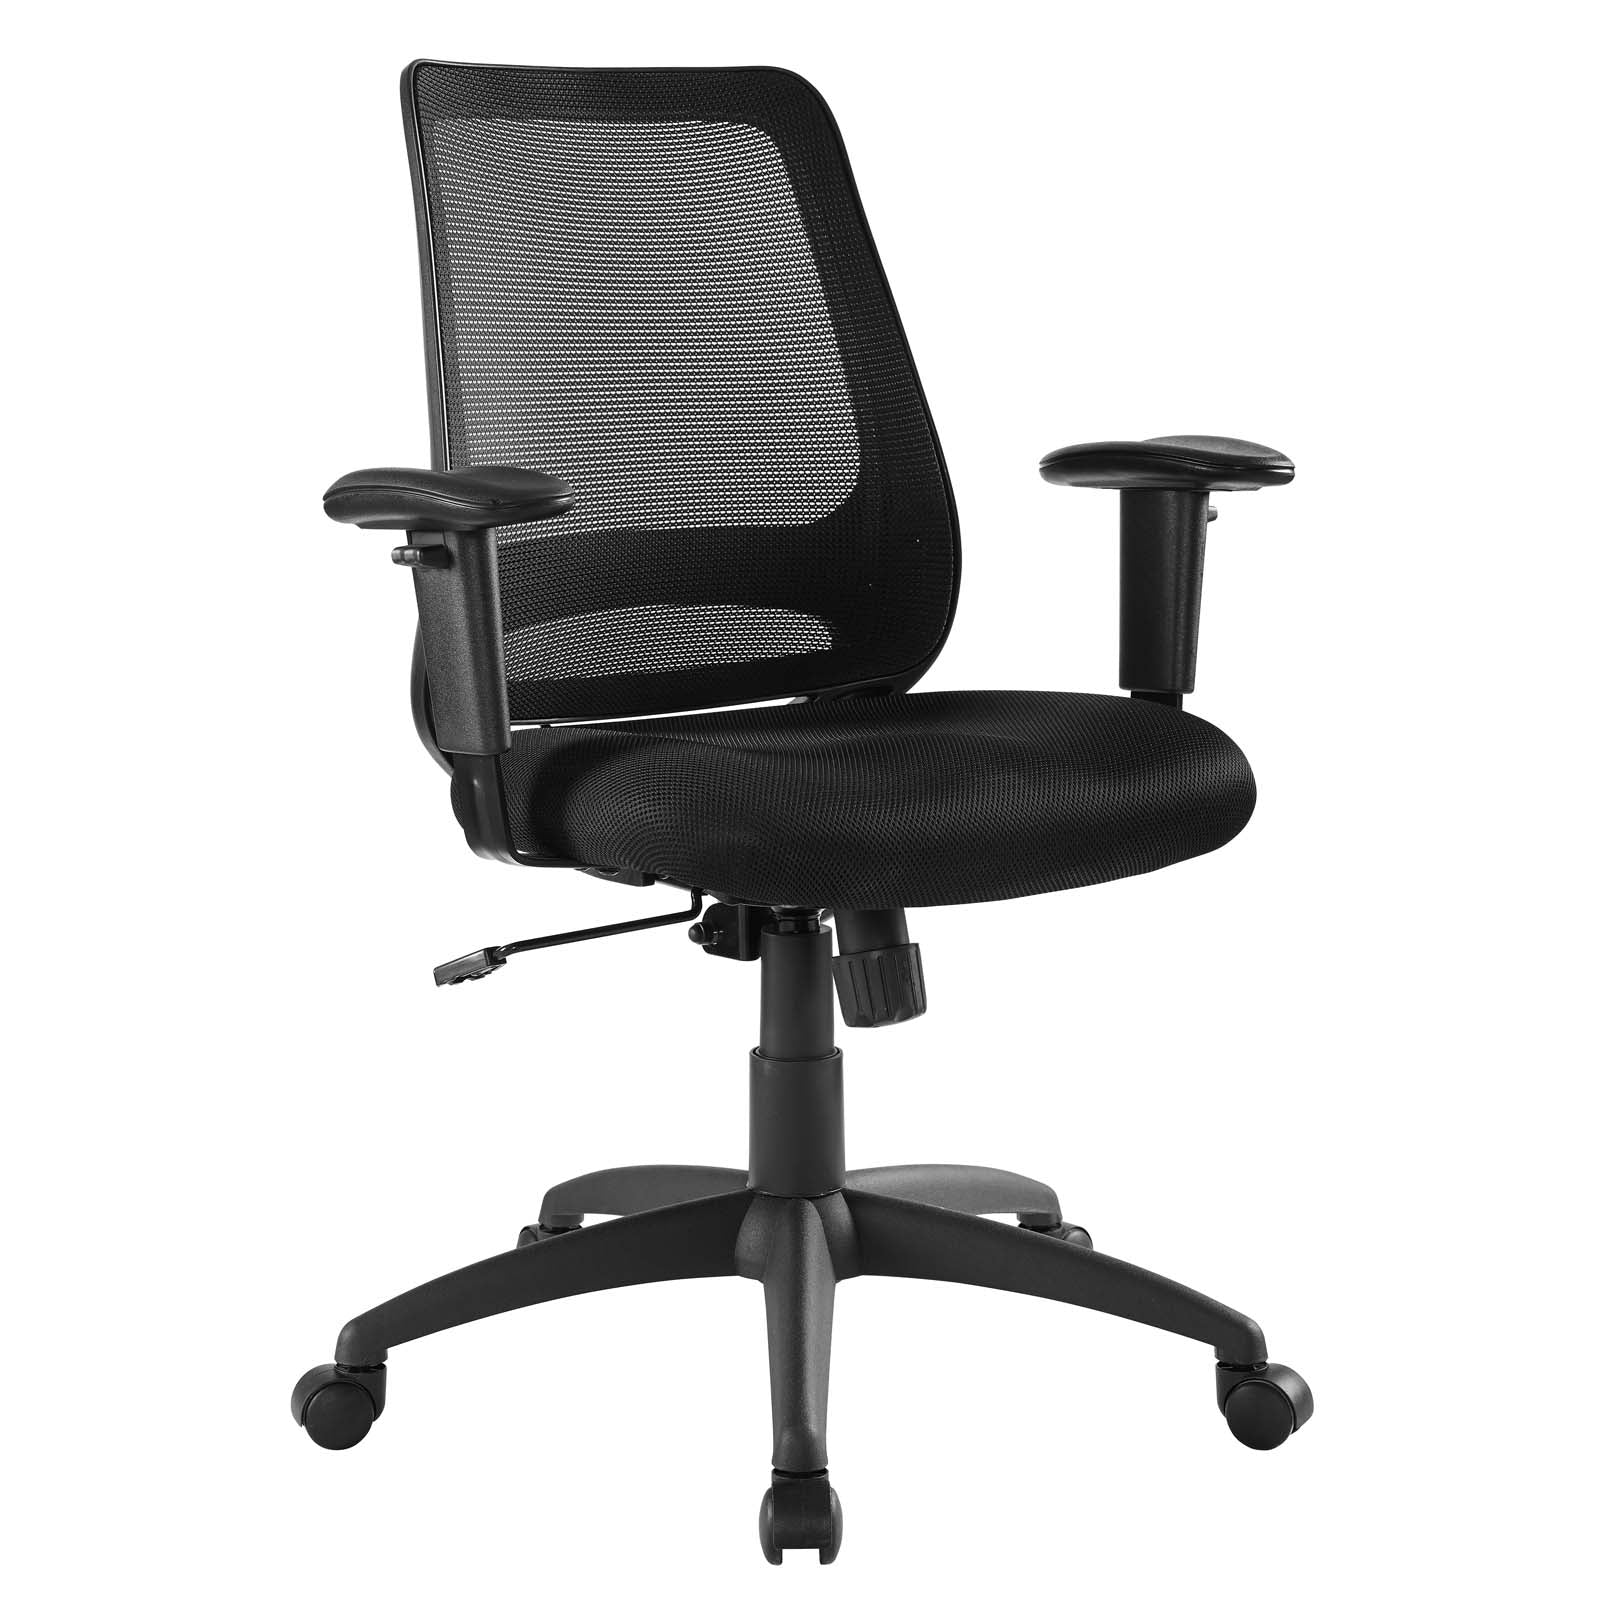 Forge Mesh Office Chair For Extra Comfort | BUILDMyplace 